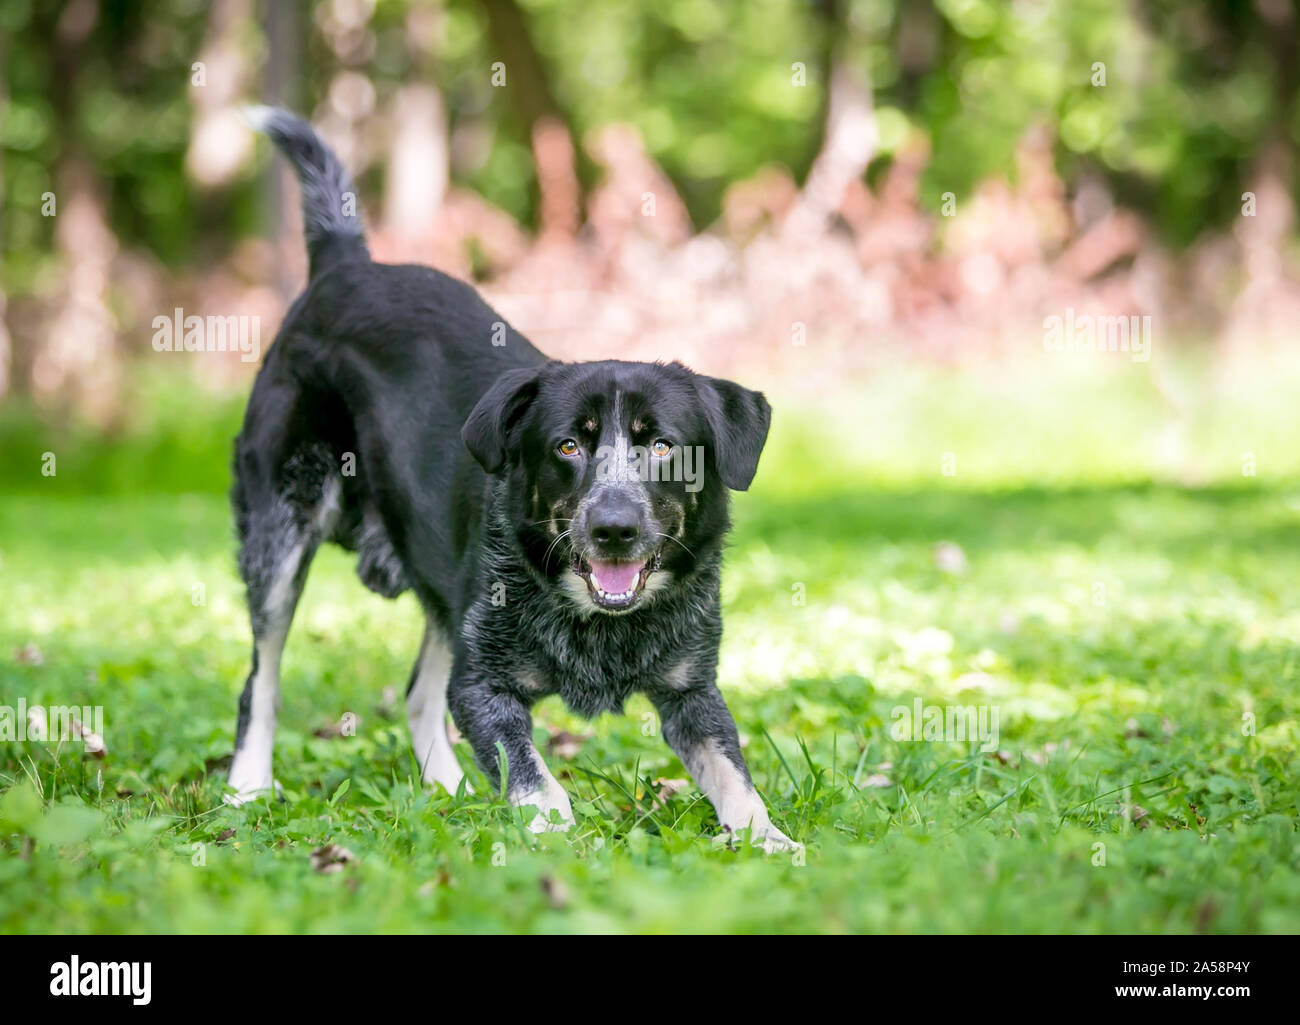 A playful Border Collie / Australian Cattle Dog mixed breed dog in a play bow position Stock Photo